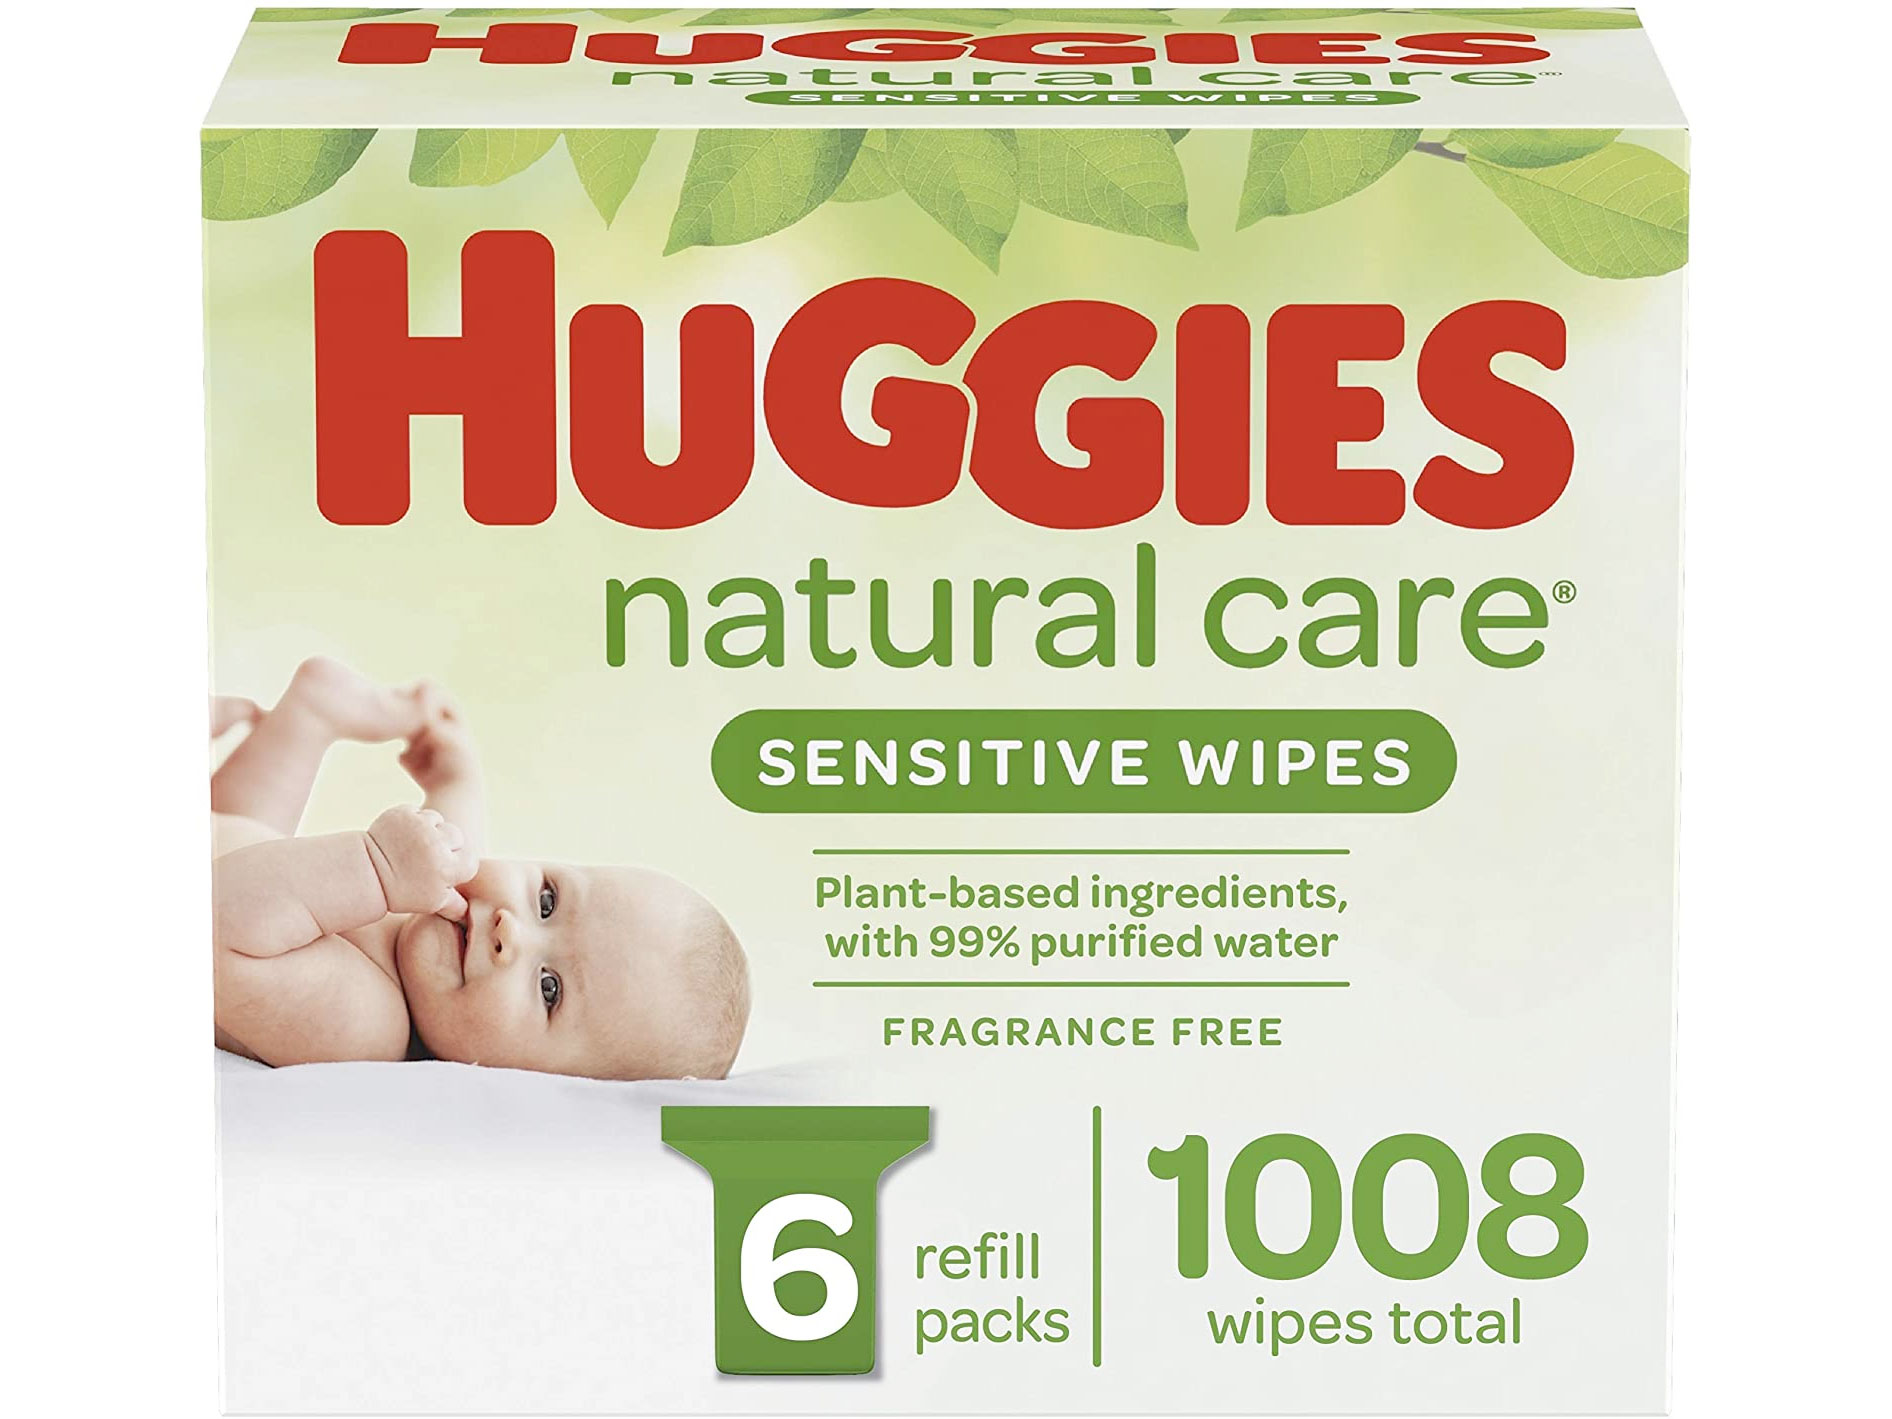 Amazon：Huggies Natural Care Sensitive Baby Wipes (1008 count)只卖$18.97